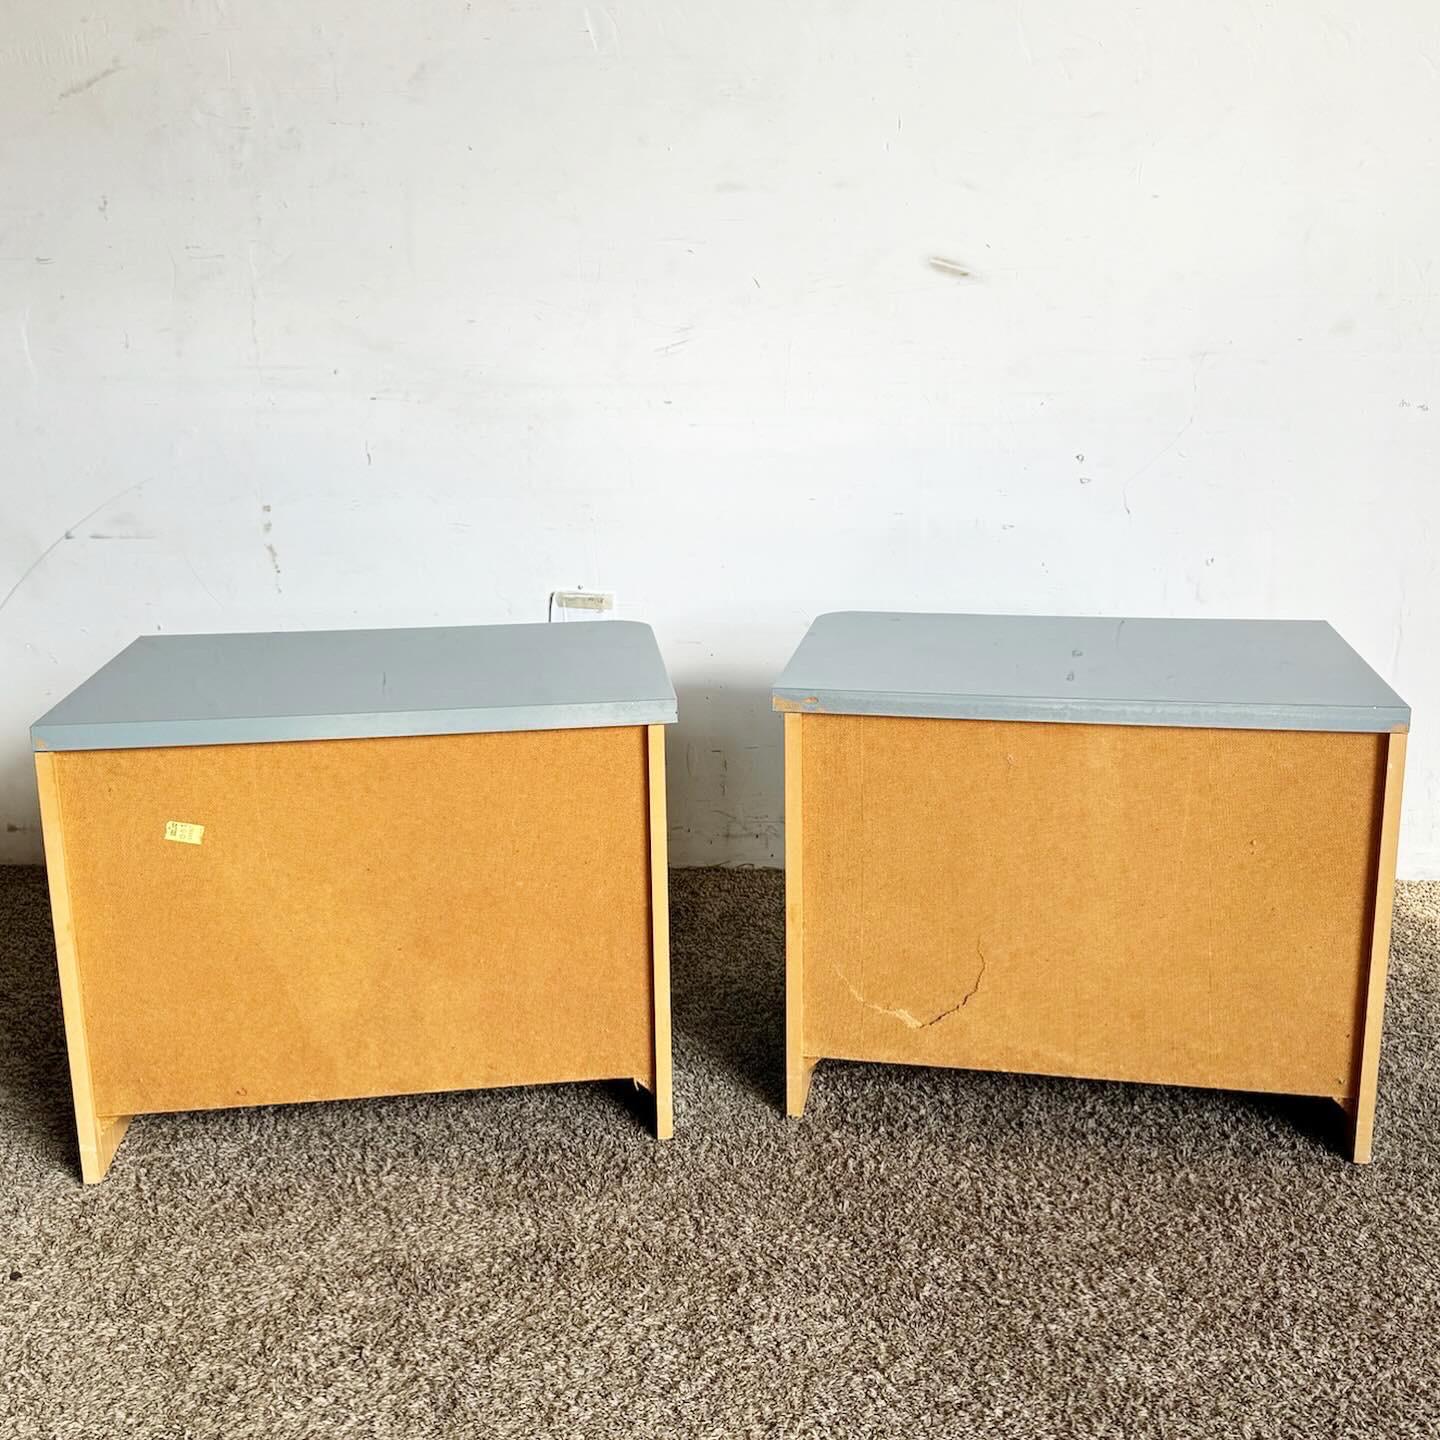 20th Century Italian Postmodern Baby Blue Lacquered Nightstands With Gold Accents – a Pair For Sale